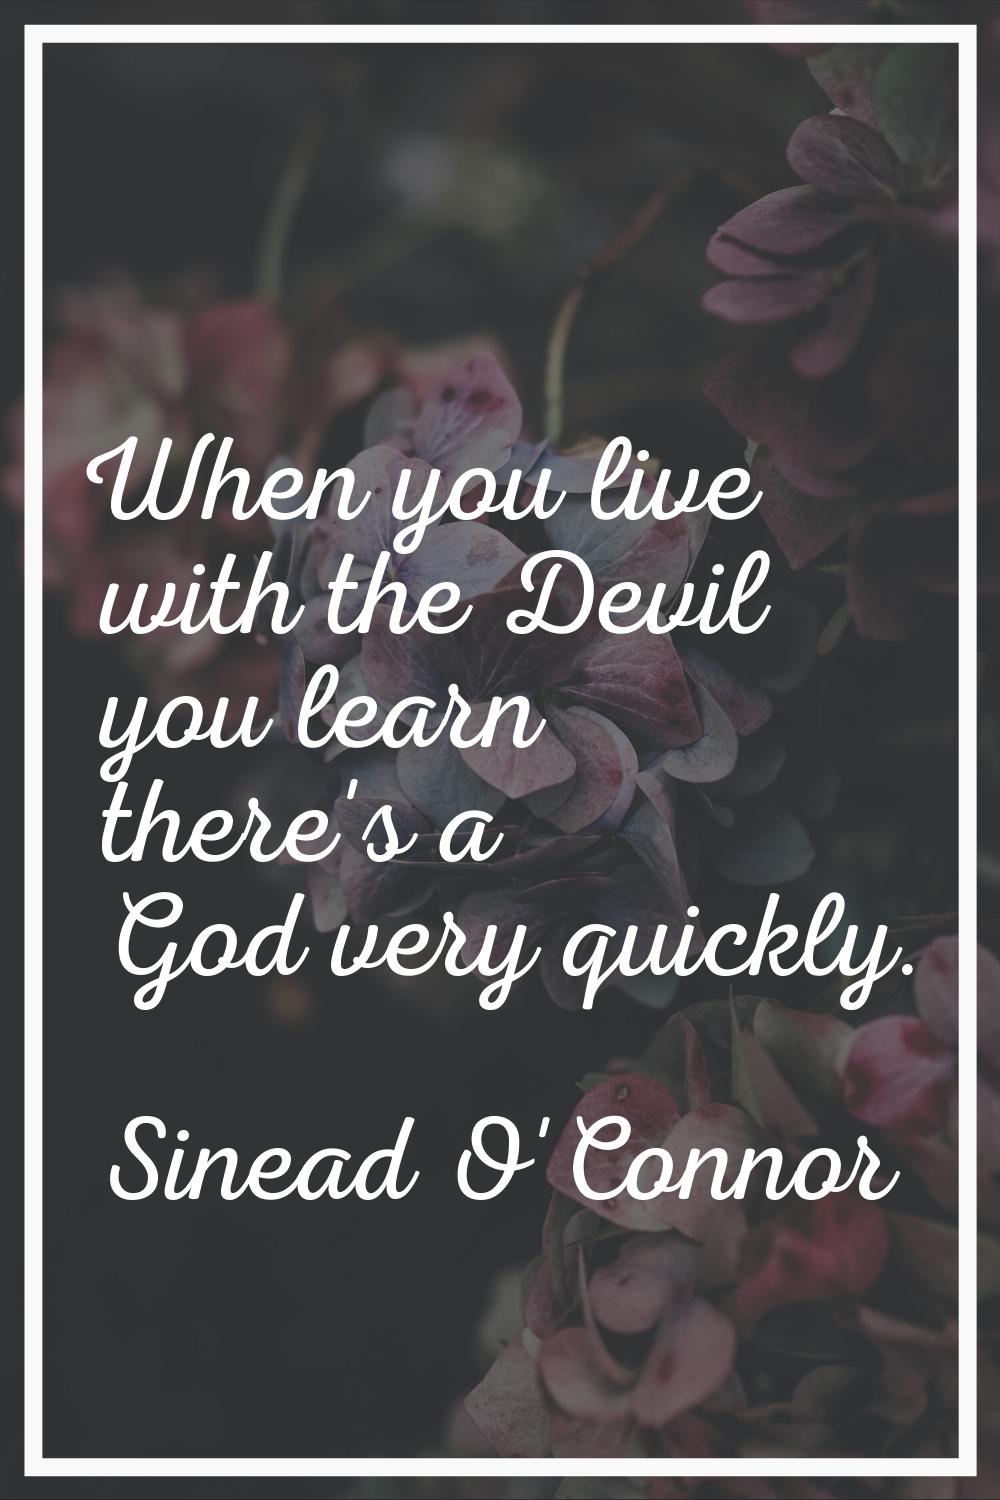 When you live with the Devil you learn there's a God very quickly.